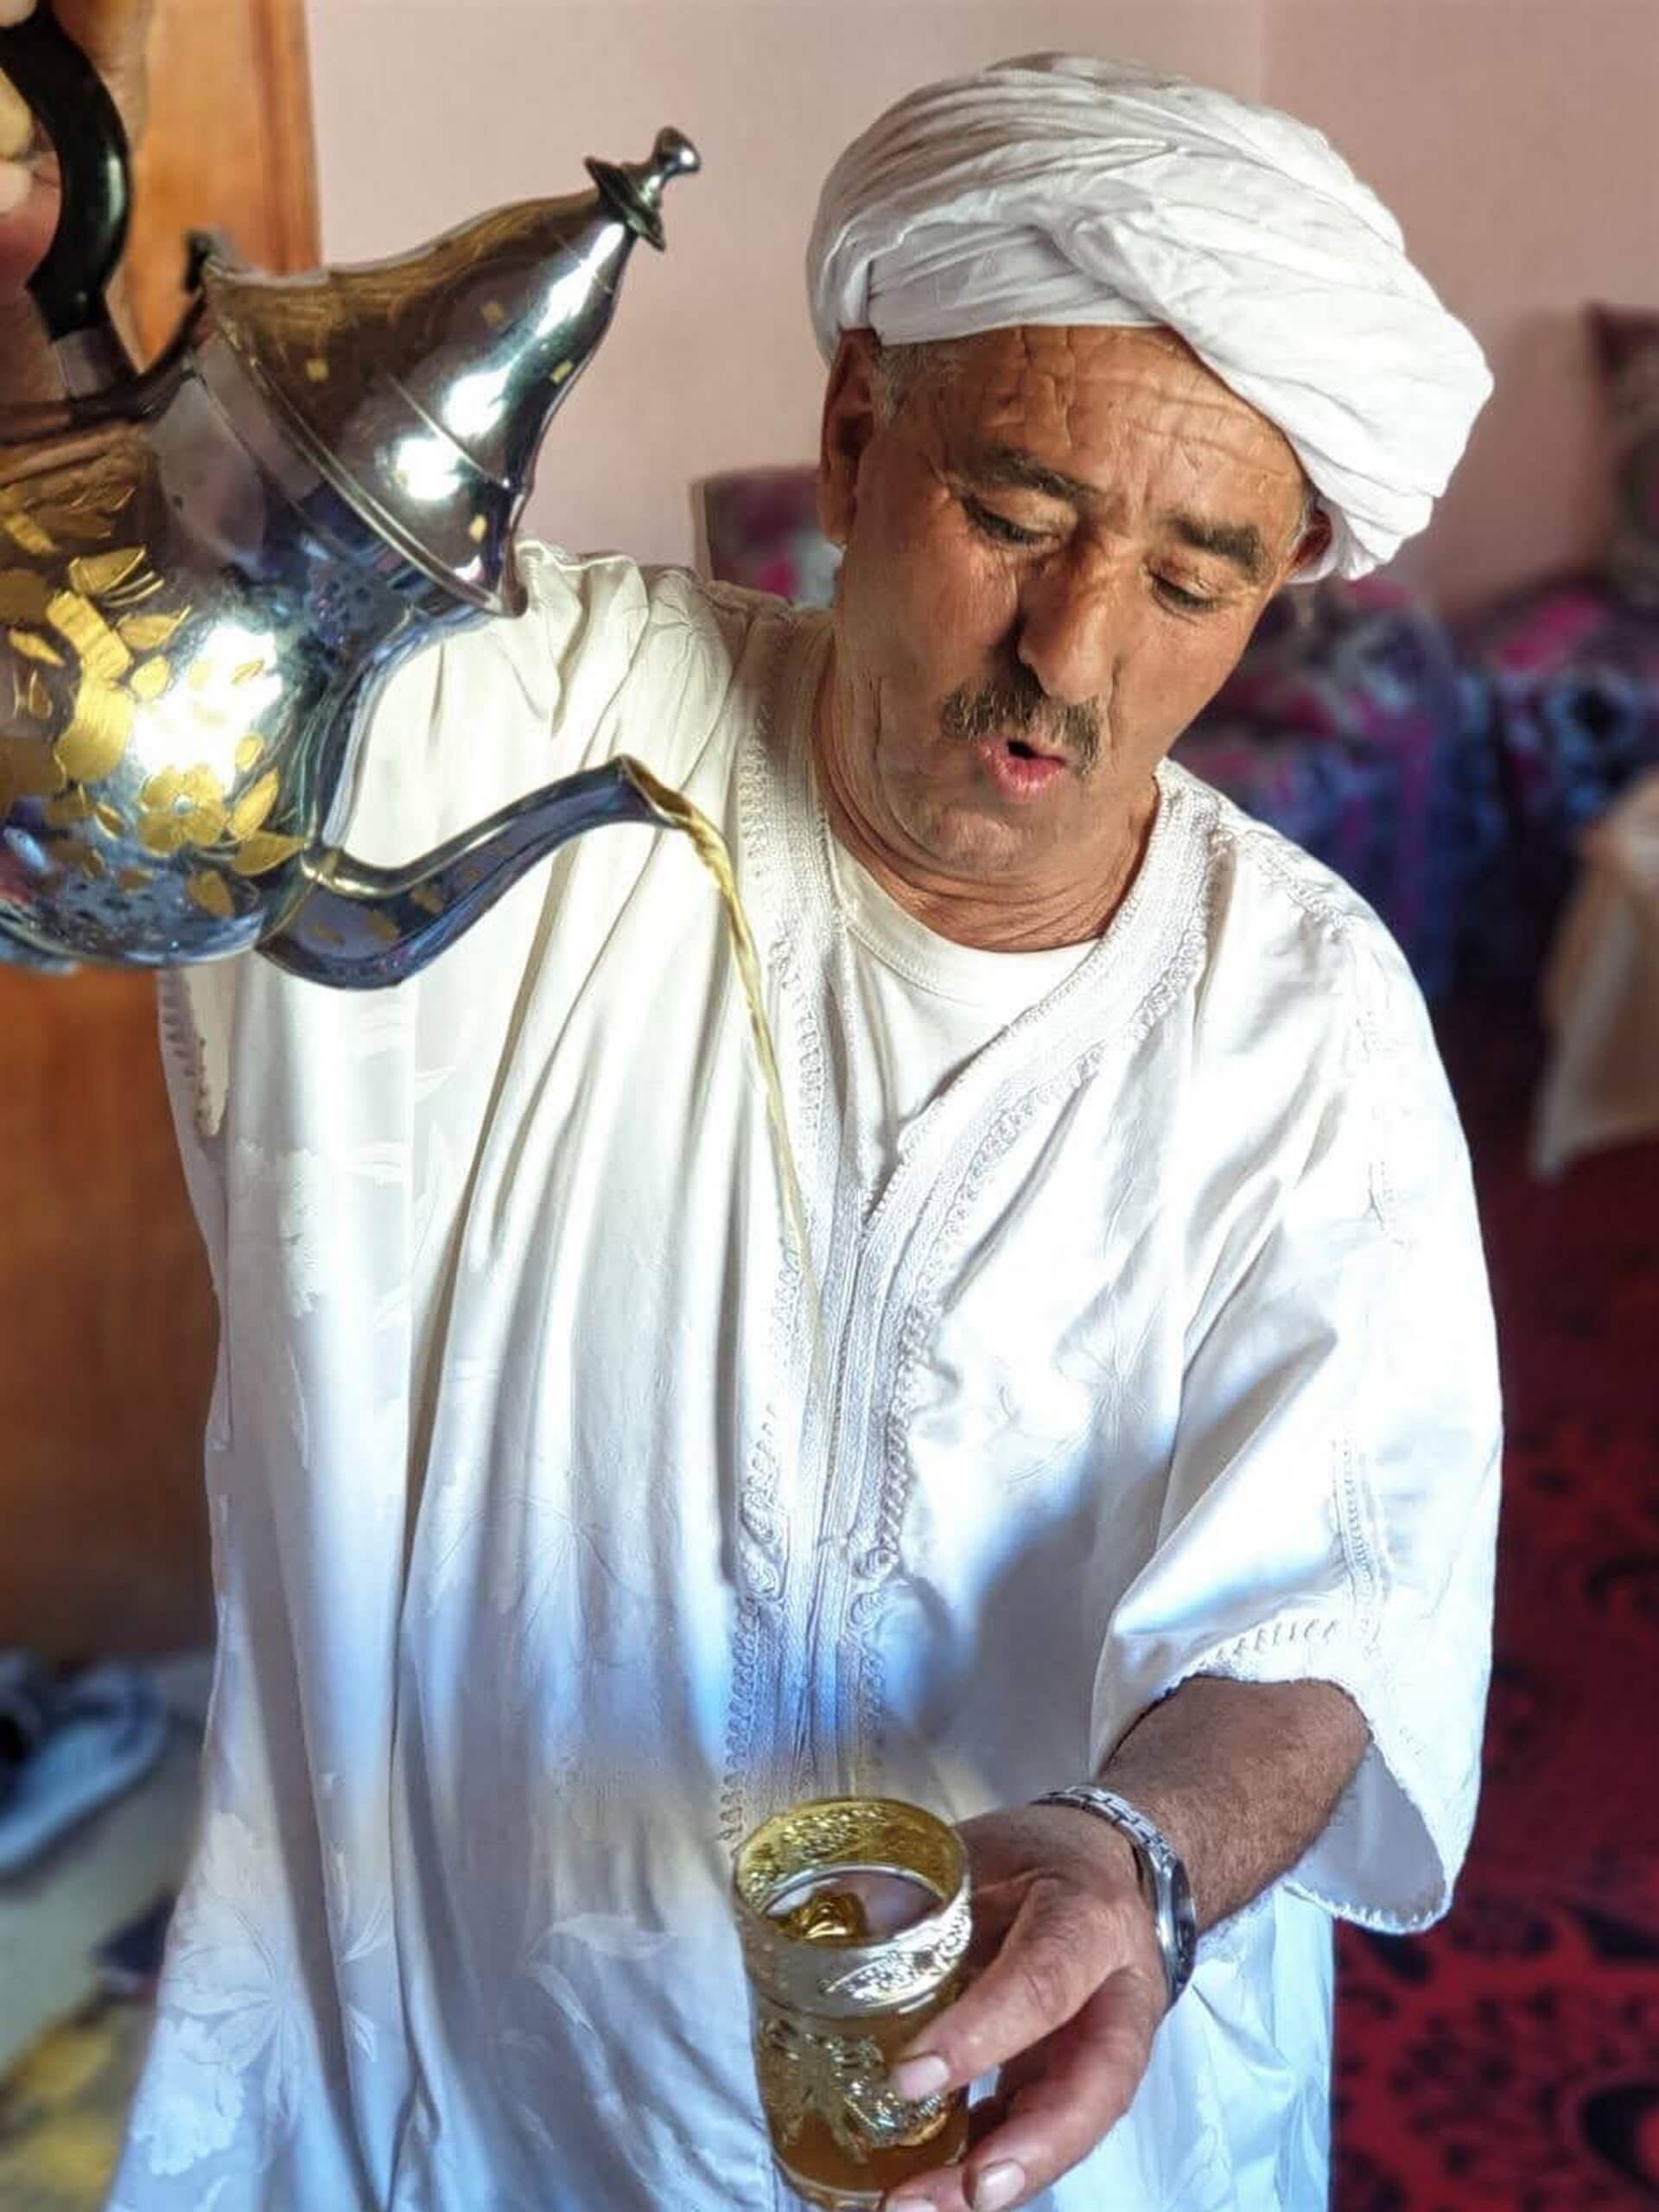 Tea drinking in Morocco